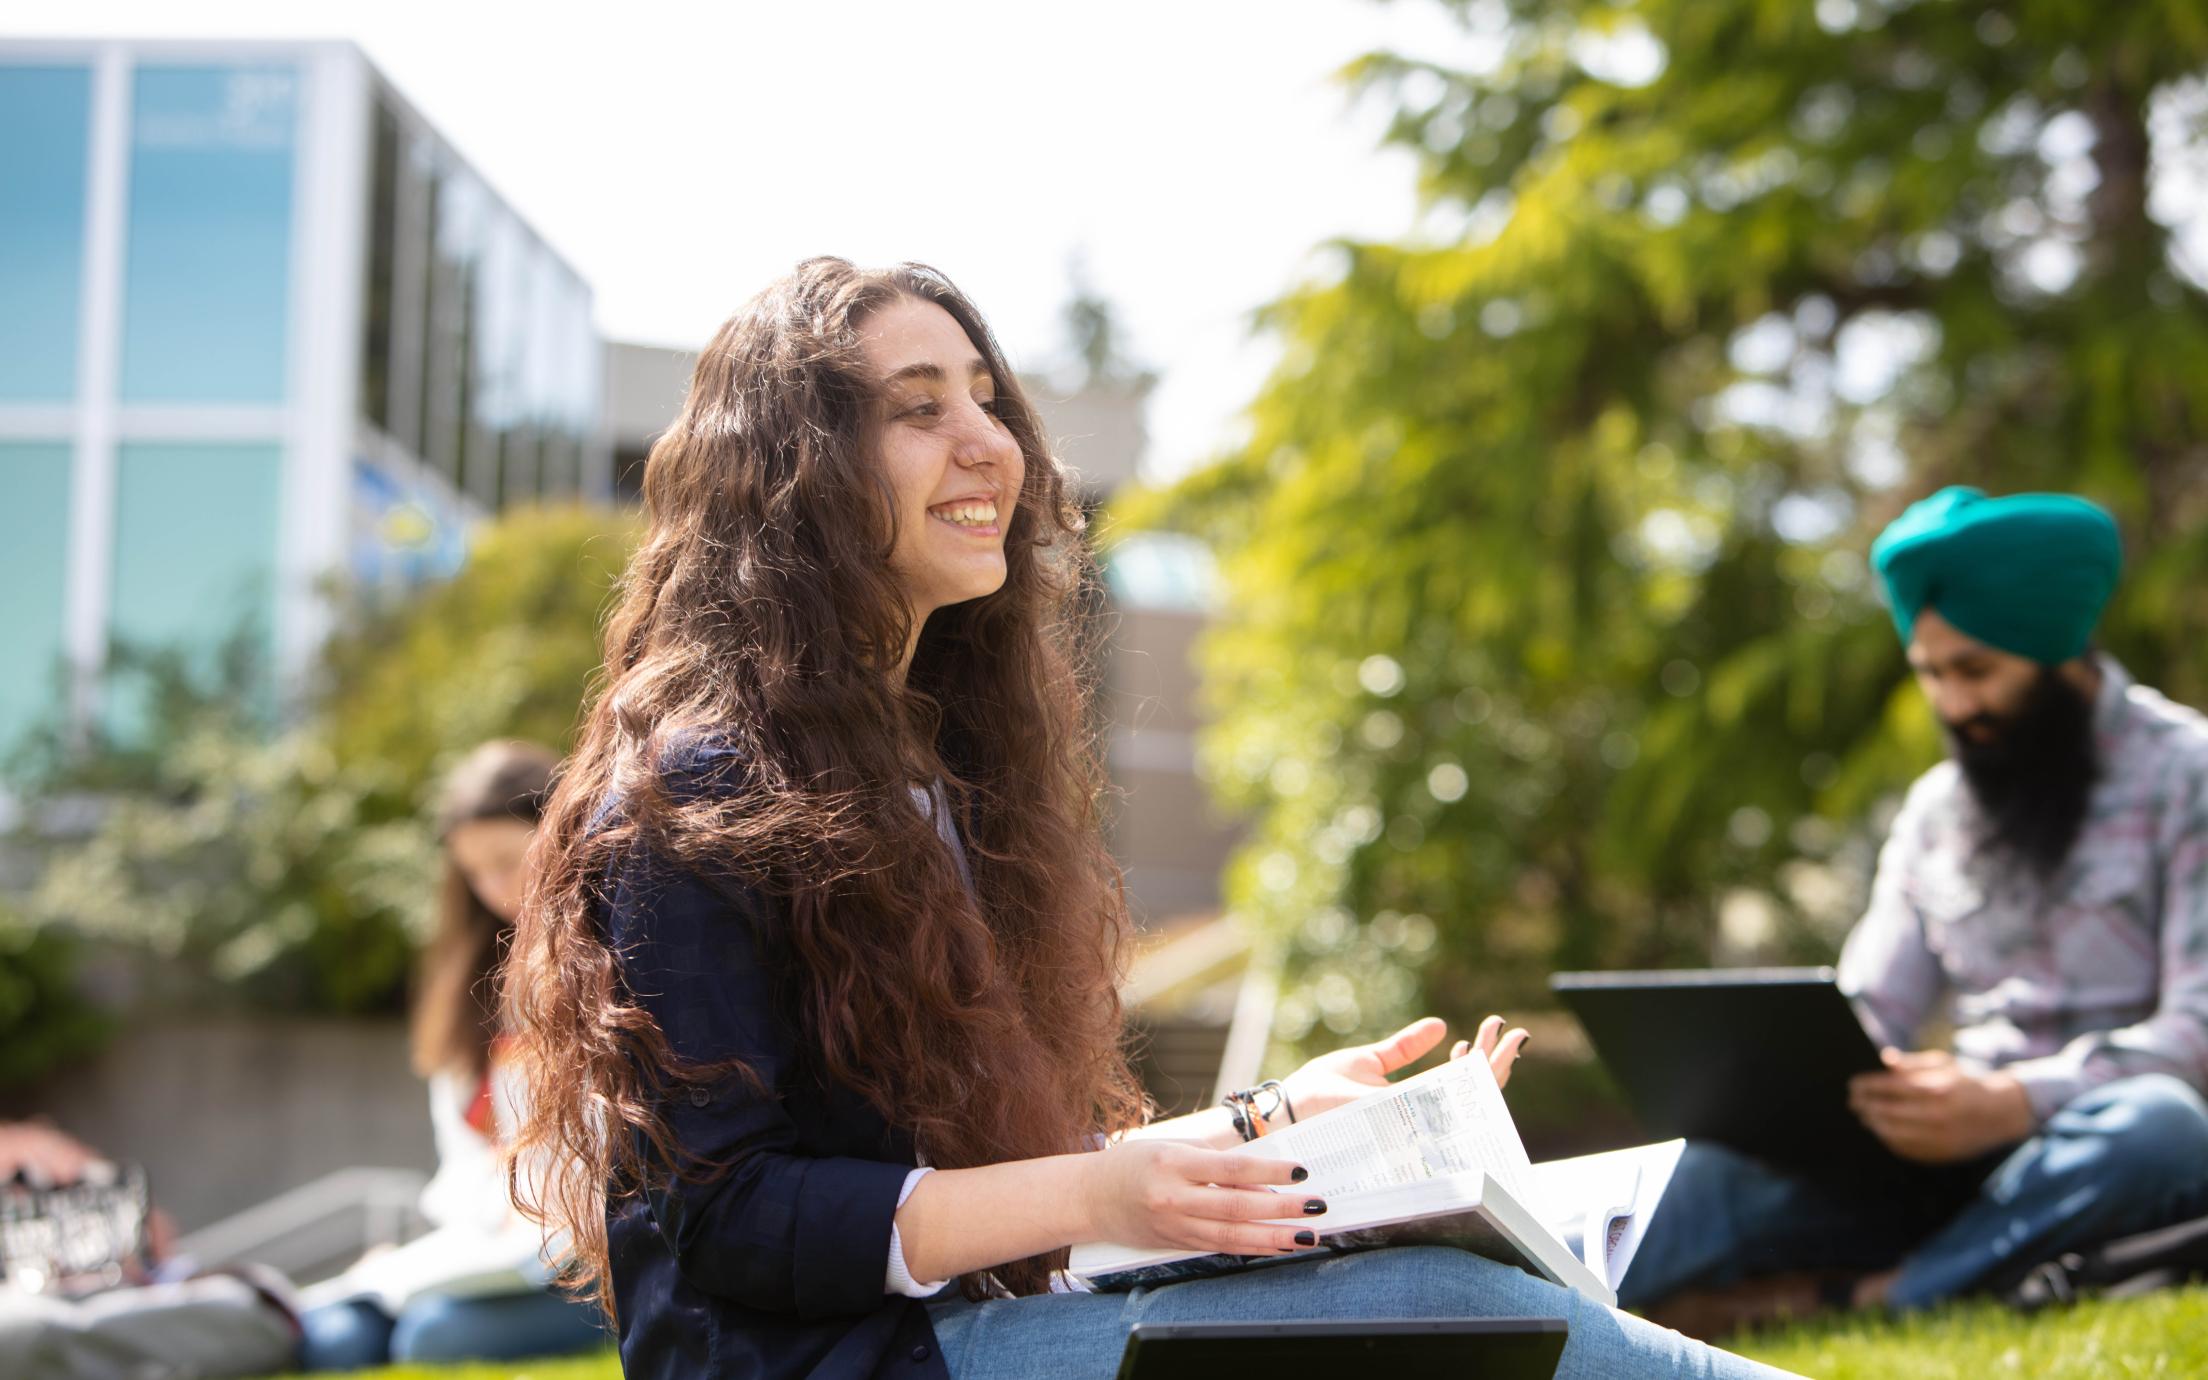 Student sits on grass with her books open with other students in the background